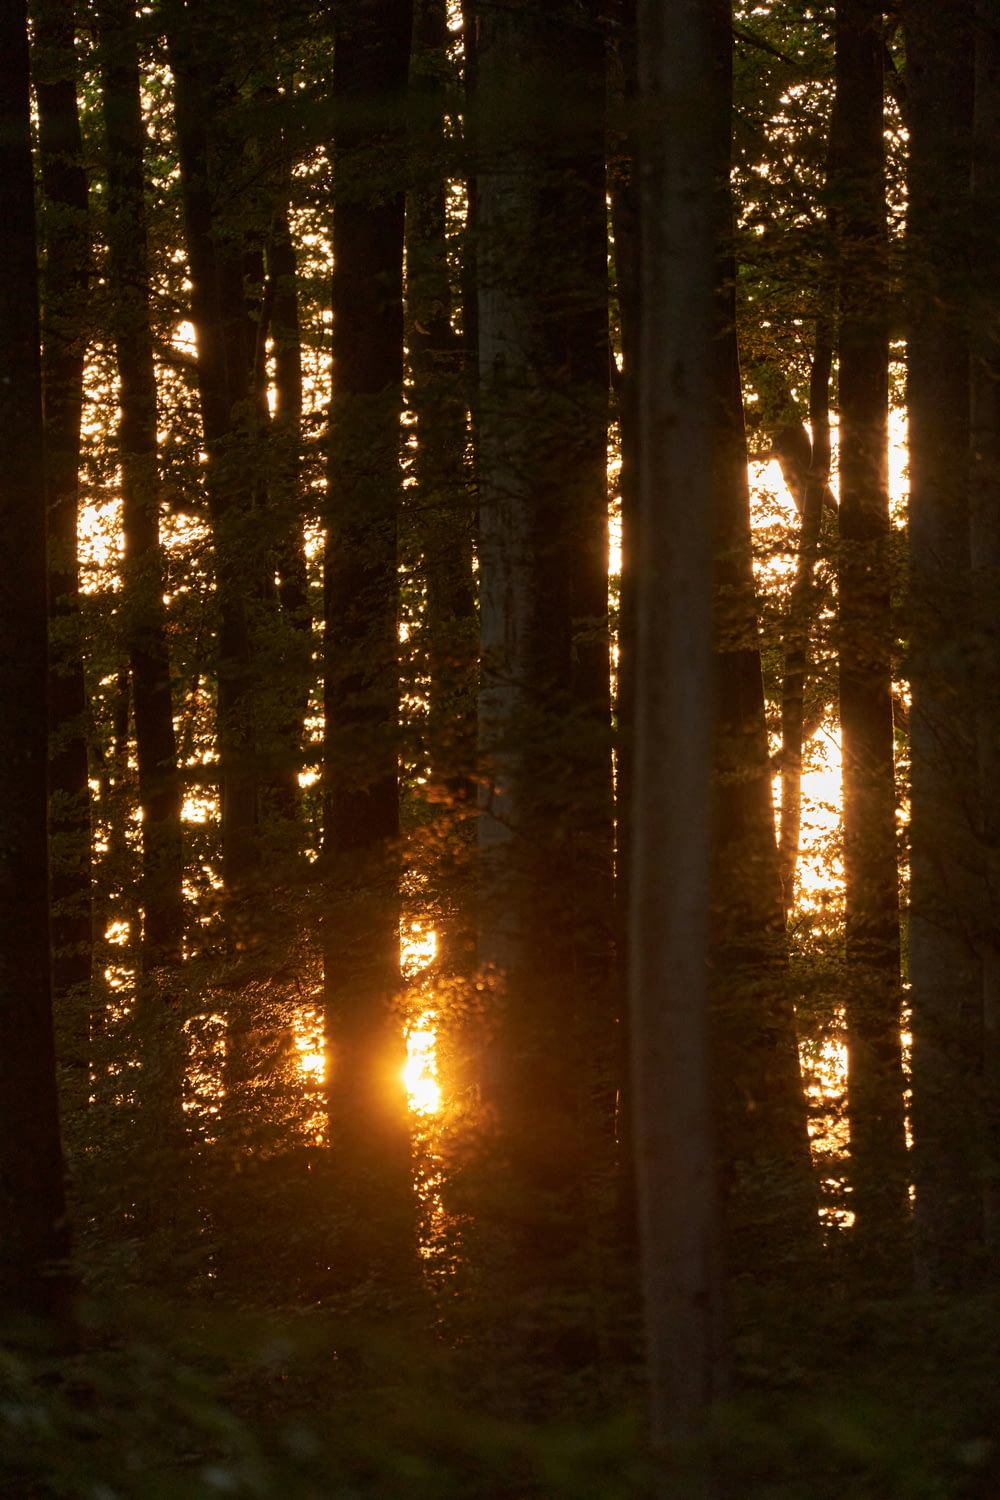 the sun is shining through the trees in the woods